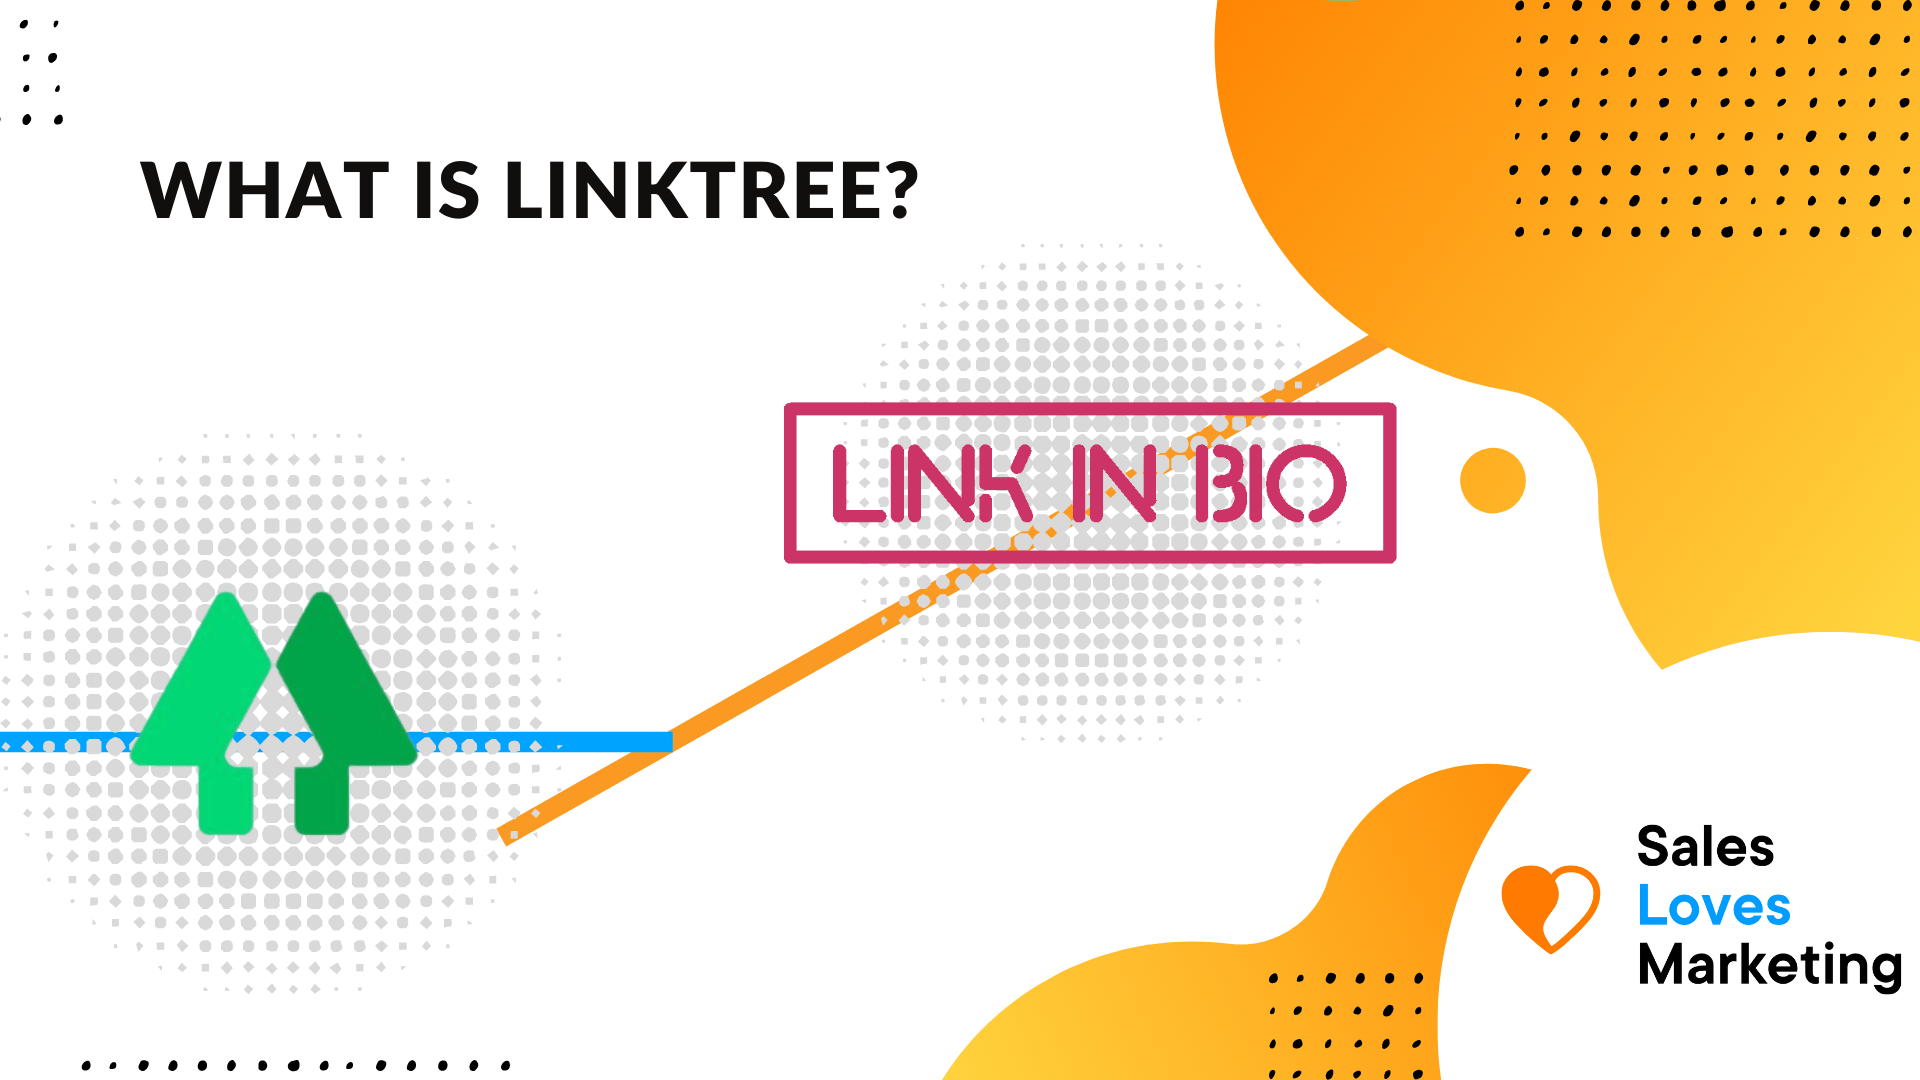 What is Linktree?